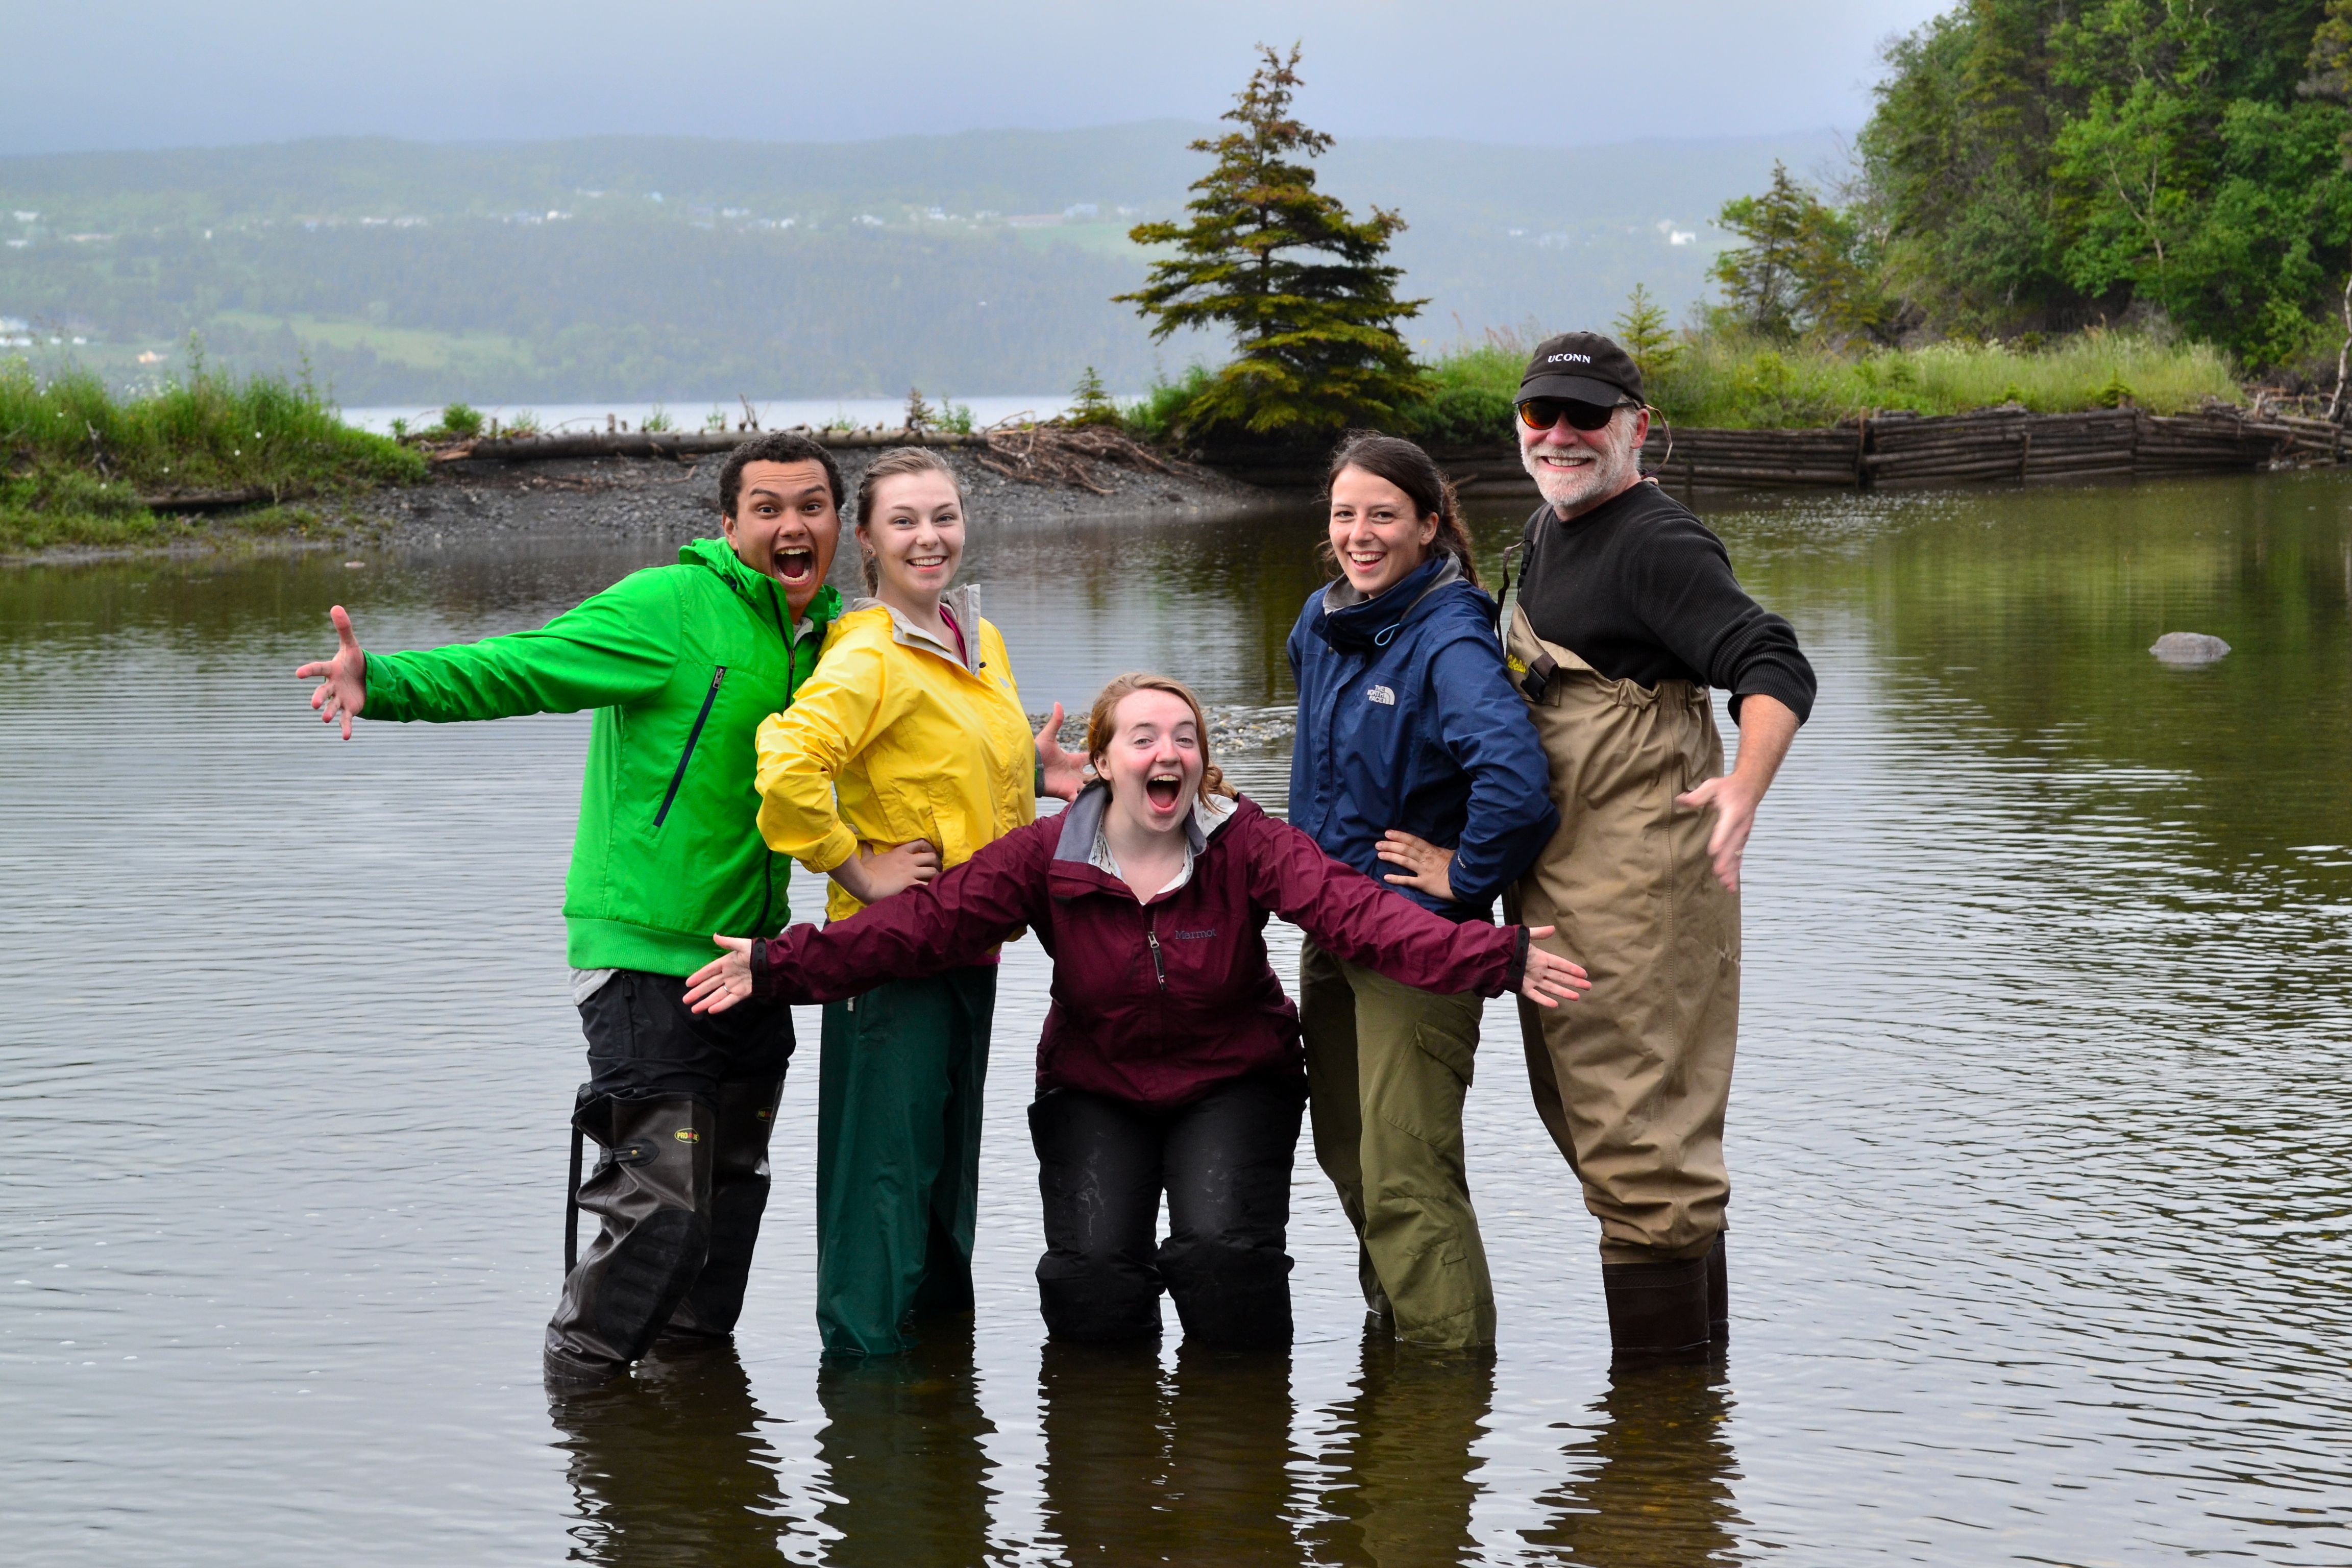 We Seine in the Rain: The Beginnings of a Newfoundland Adventure